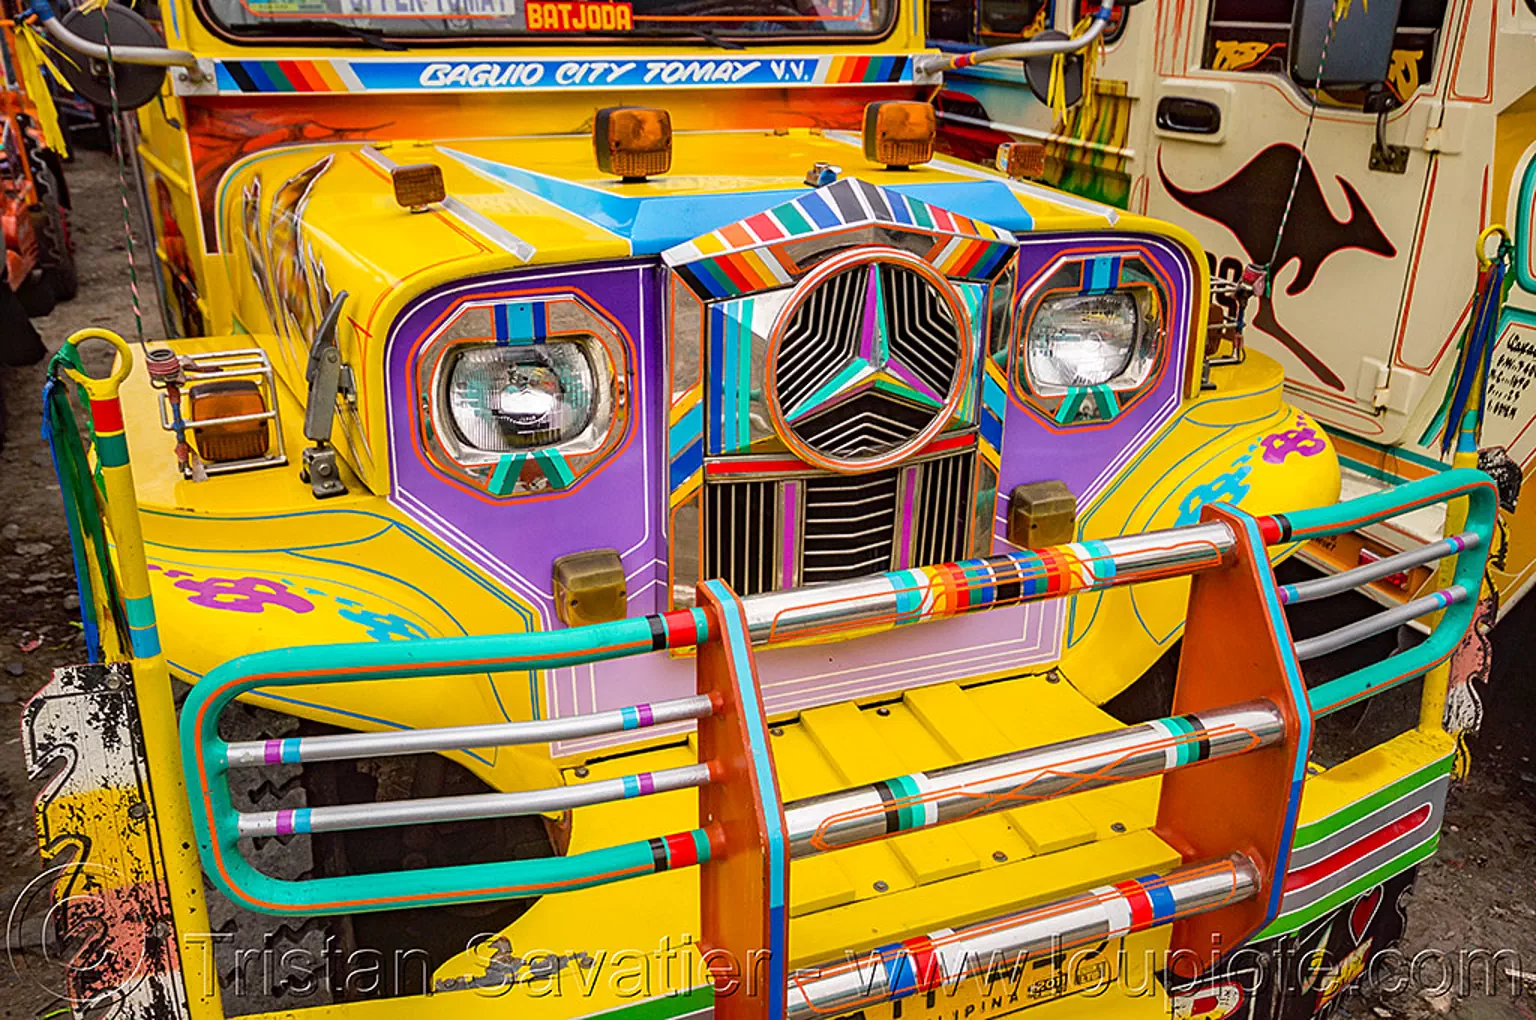 yellow jeepney - front grill (philippines), baguio, colorful, decorated, front grill, jeepney, painted, philippines, truck